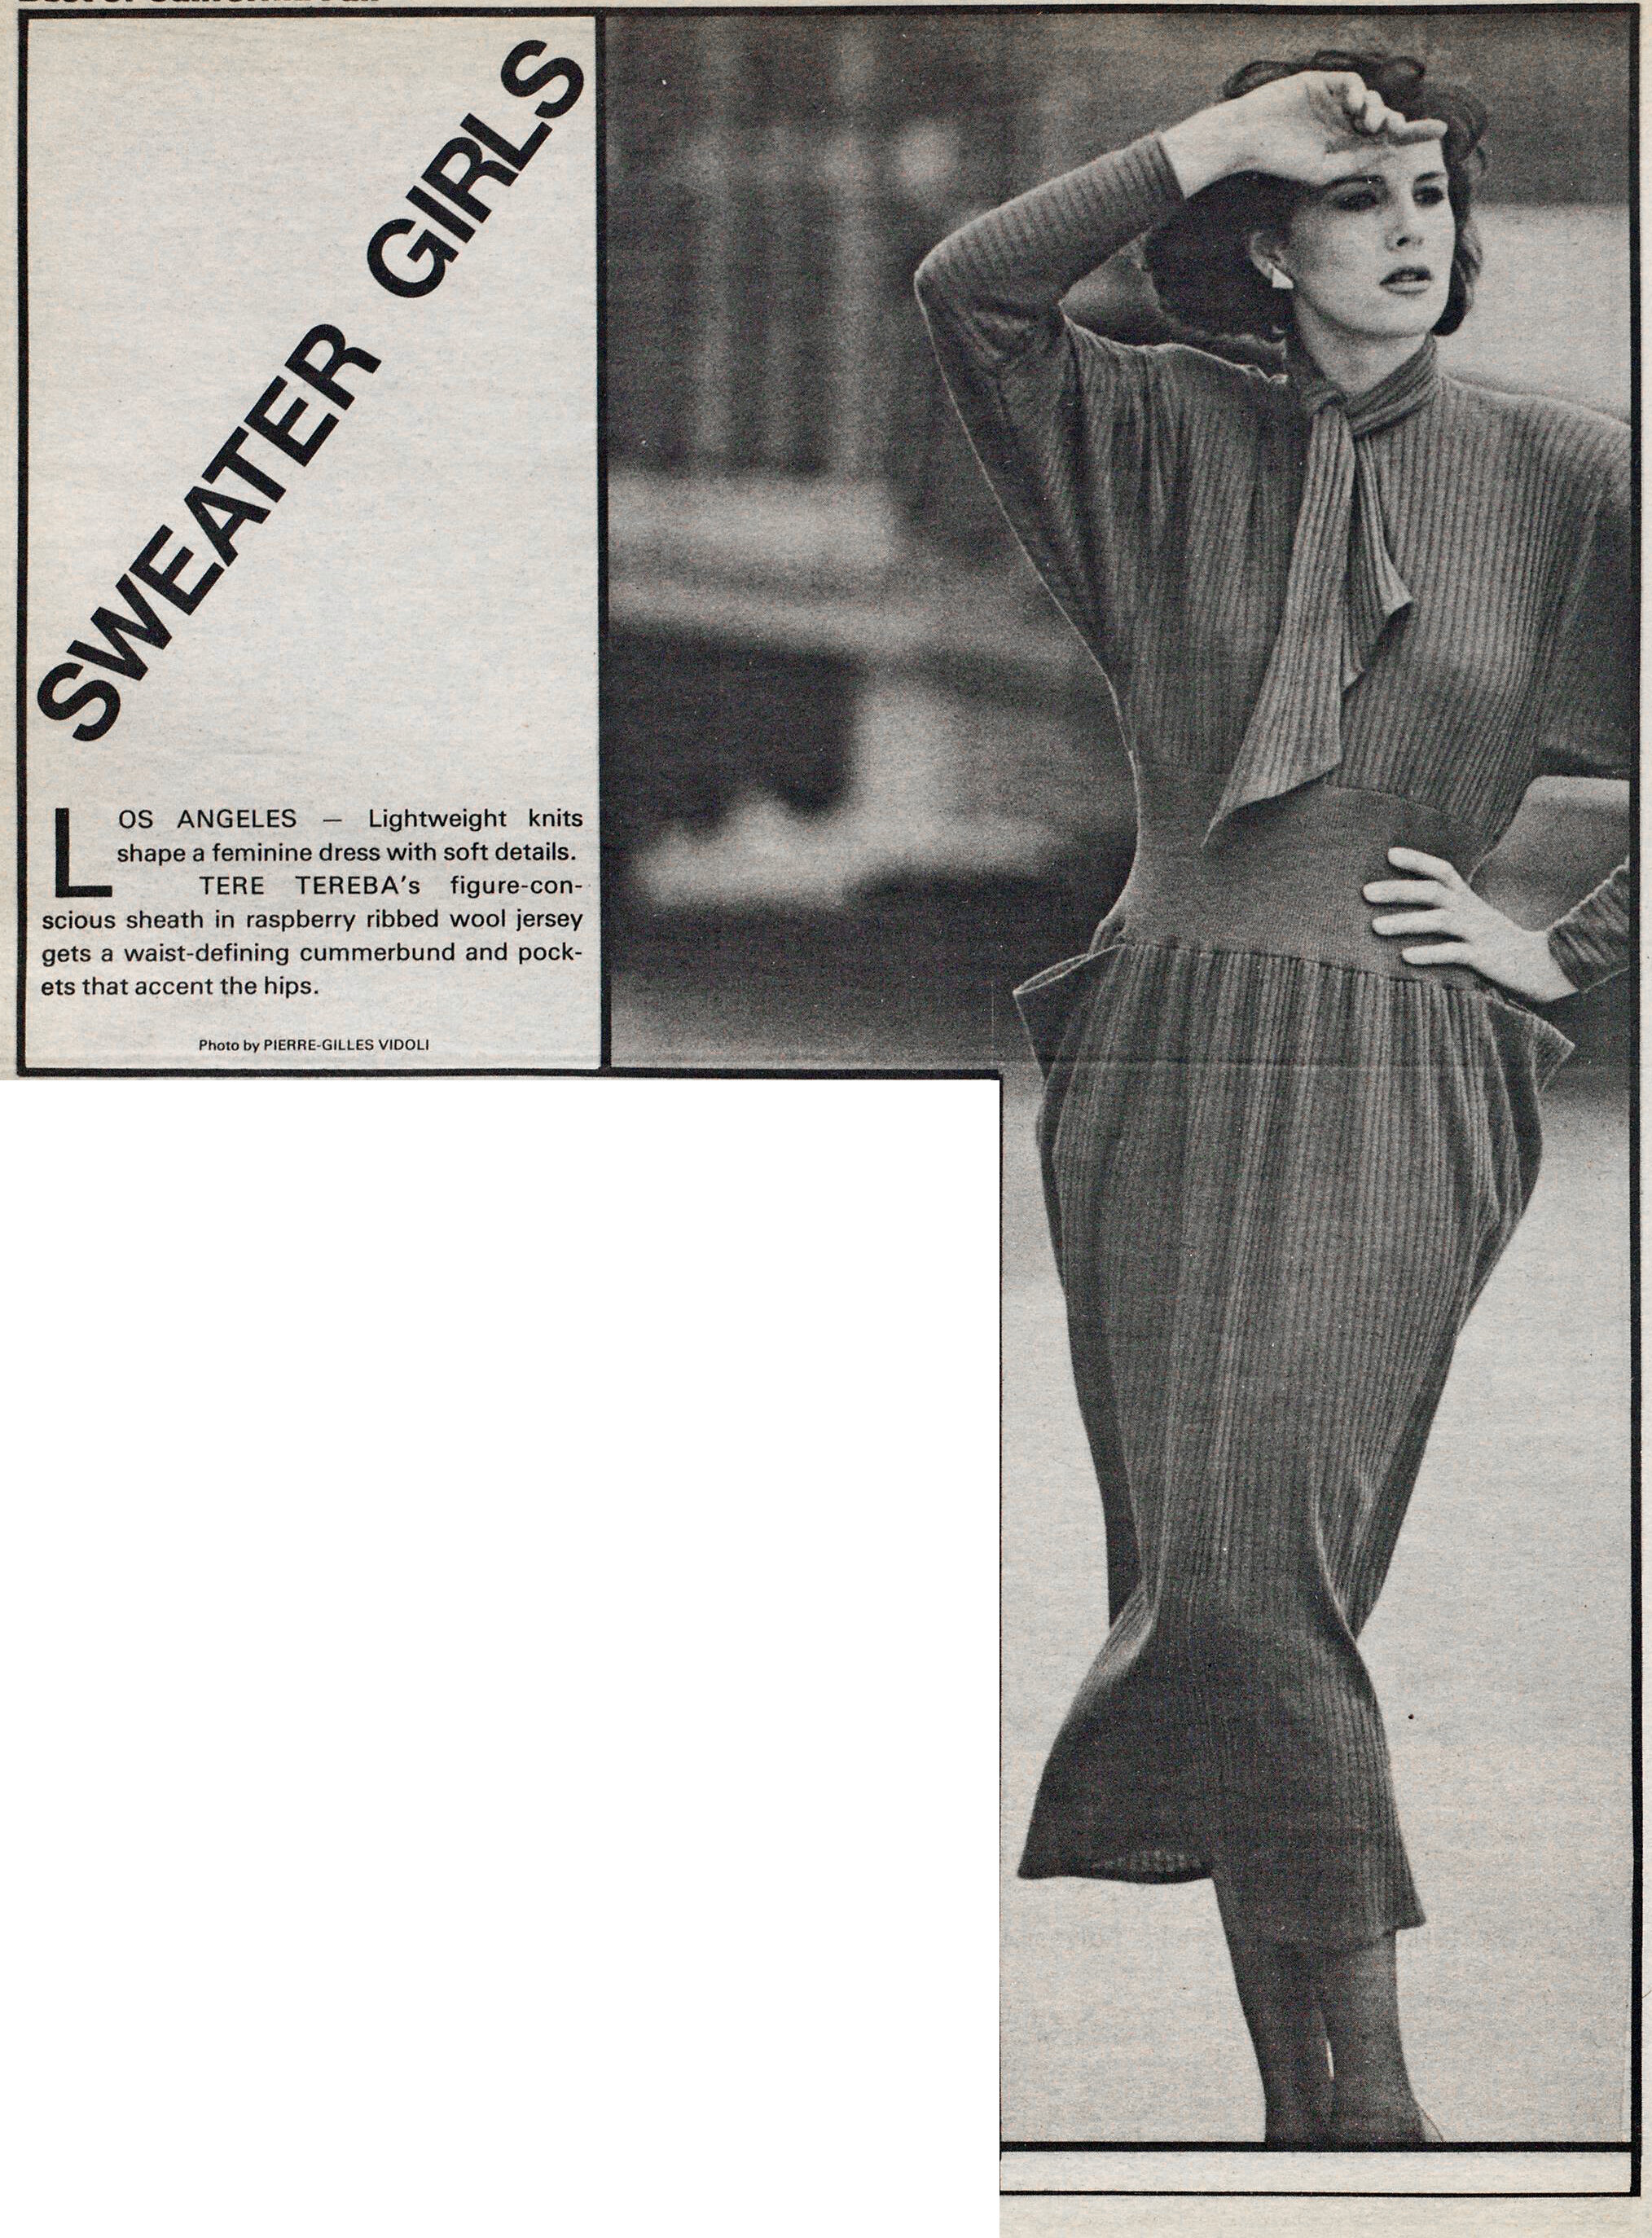 Tere Tereba collection. WWD, May 9, 1984.